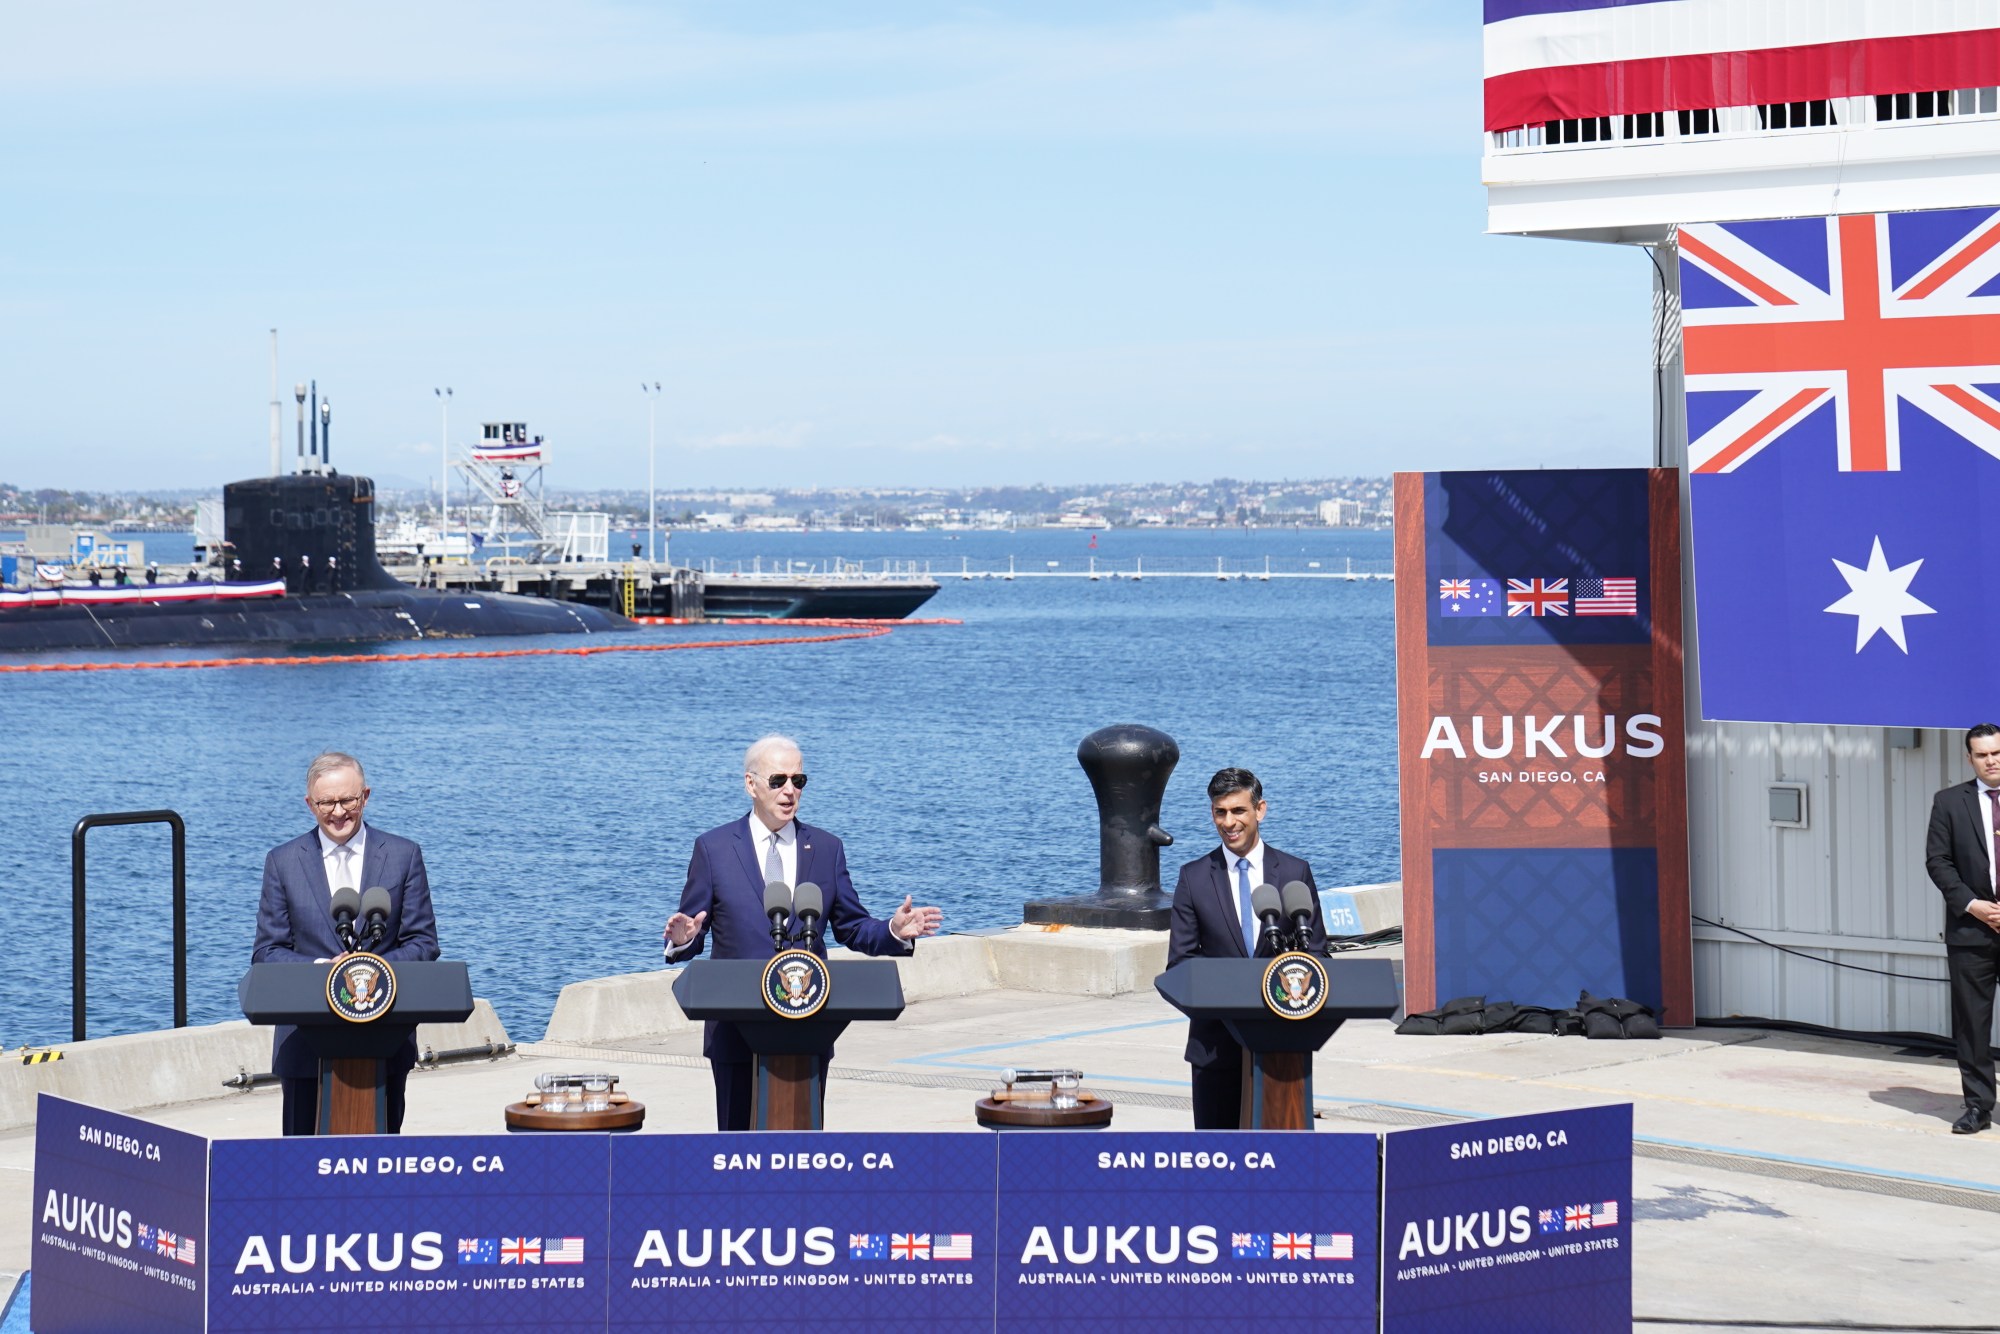 From left, Albanese, Biden and British Prime Minister Rishi Sunak following a March 13 meeting at Point Loma naval base in California to discuss the procurement of nuclear-powered submarines as part of Aukus. Photo: PA Wire/dpa